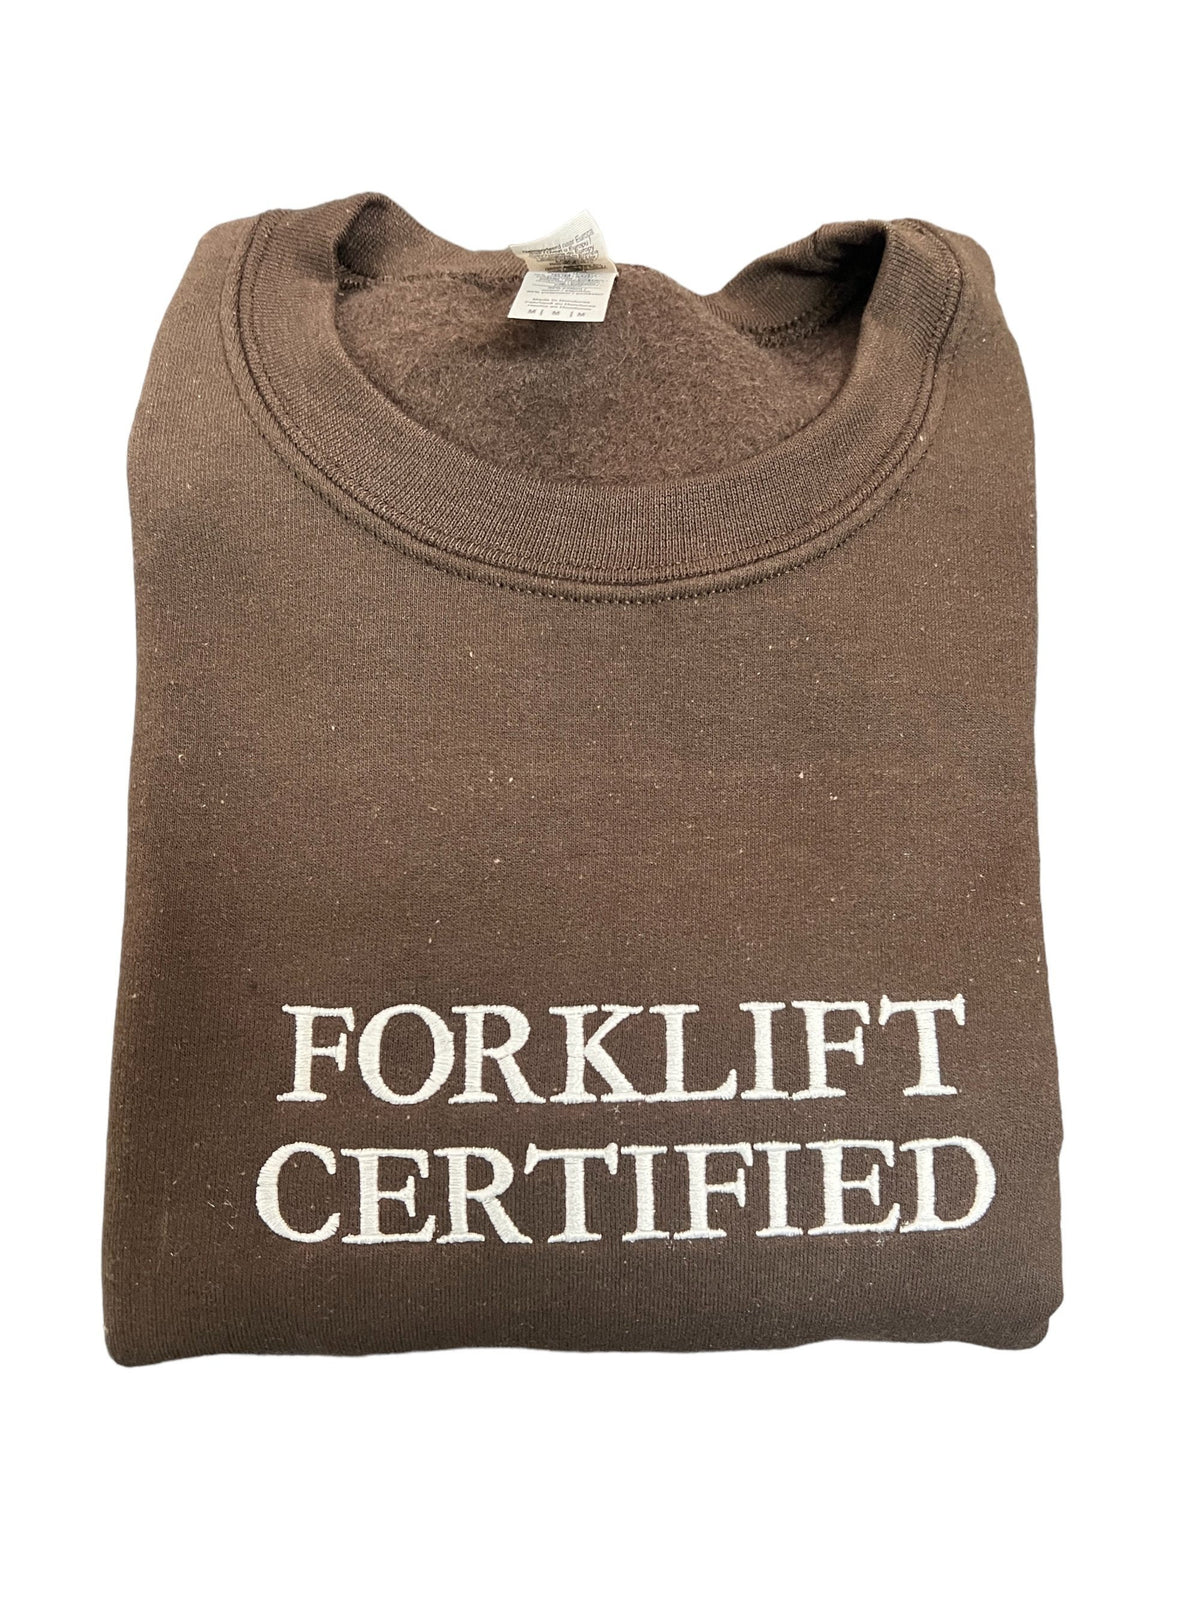 Forklift Certified Embroidered Unisex Shirt- Stacked